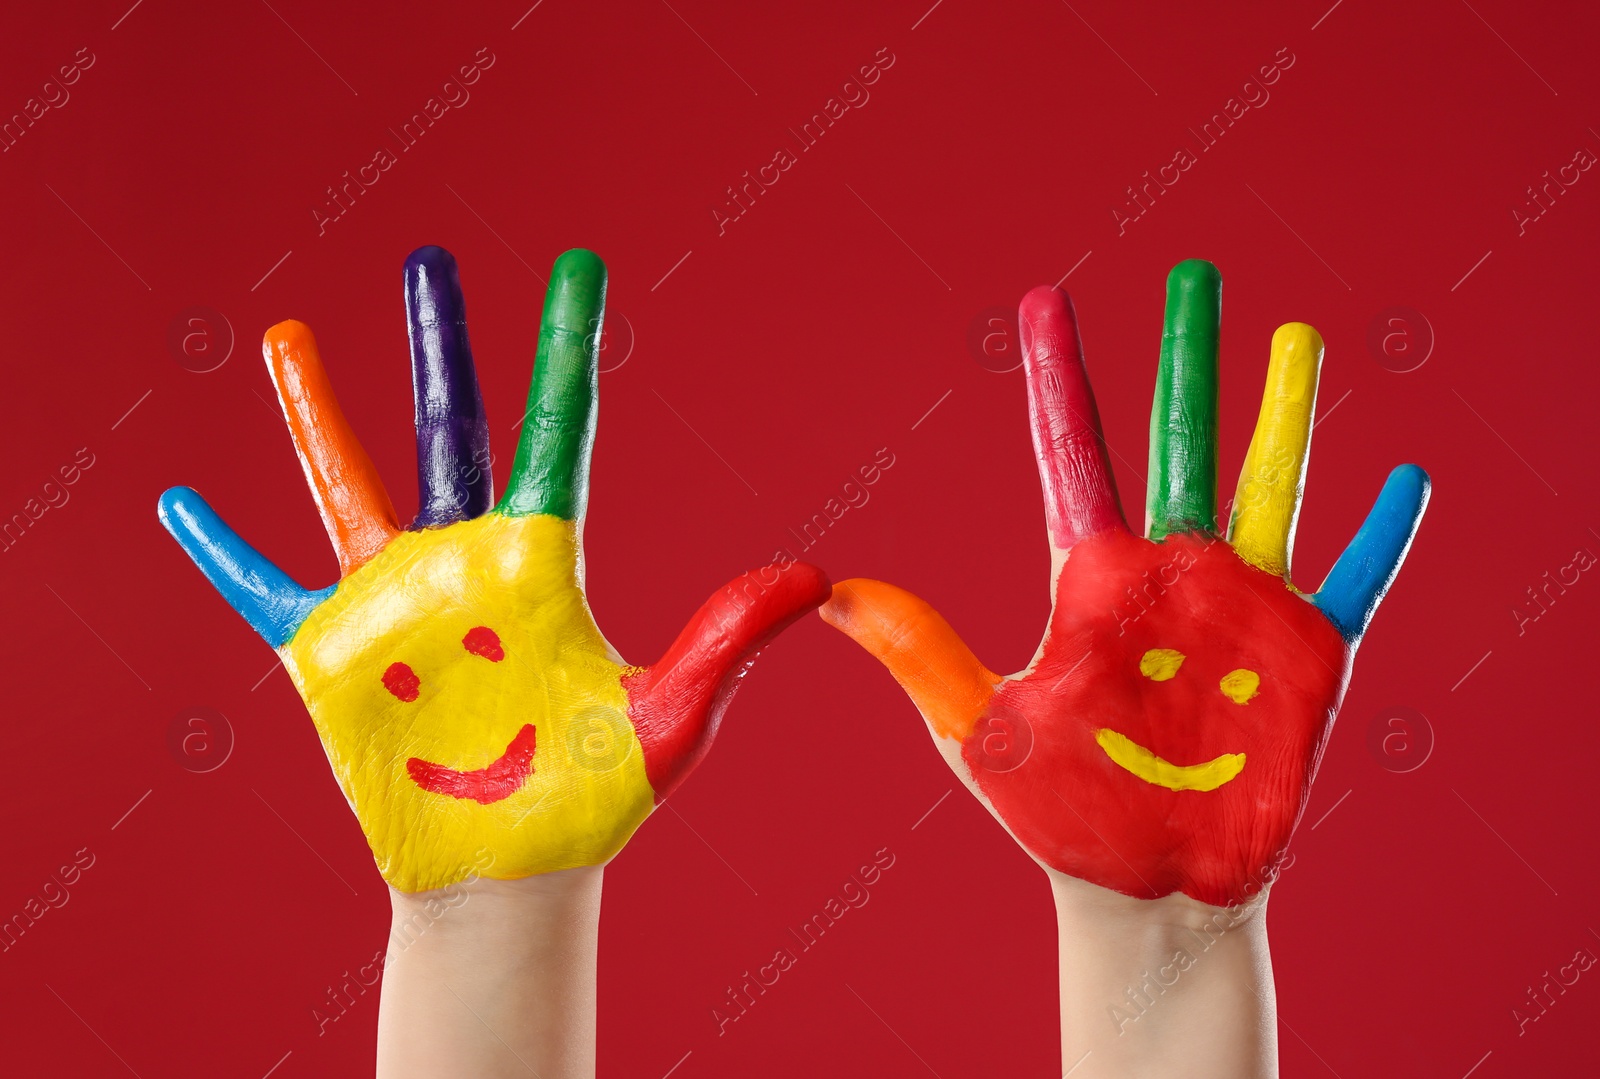 Photo of Kid with smiling faces drawn on palms against red background, closeup